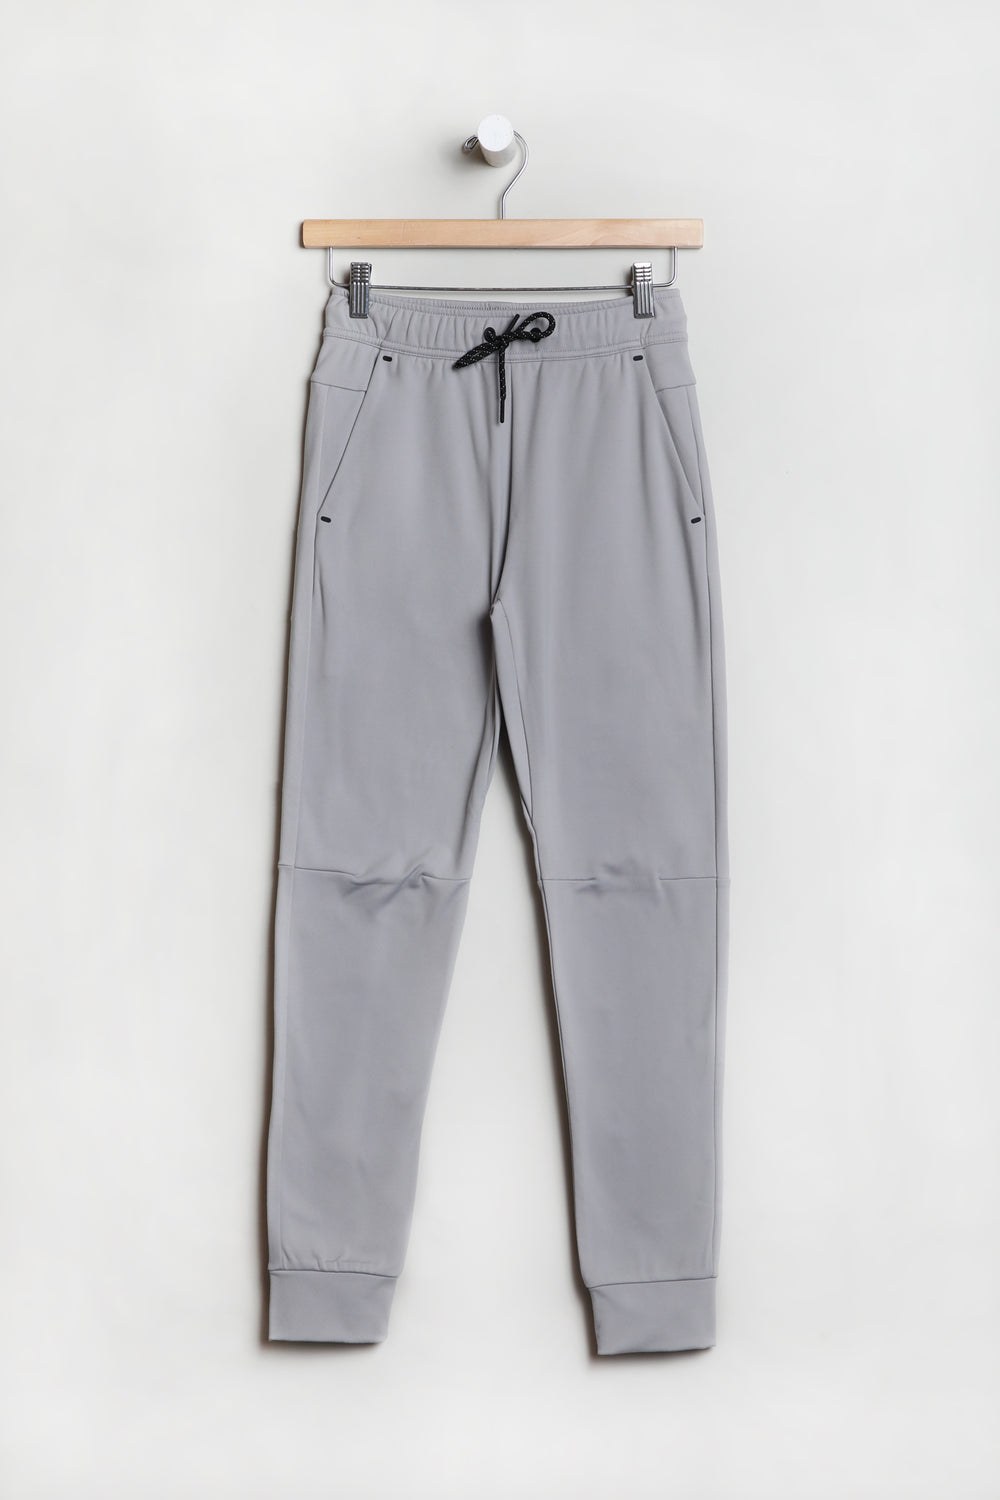 West49 Youth Power Soft Fleece Jogger West49 Youth Power Soft Fleece Jogger